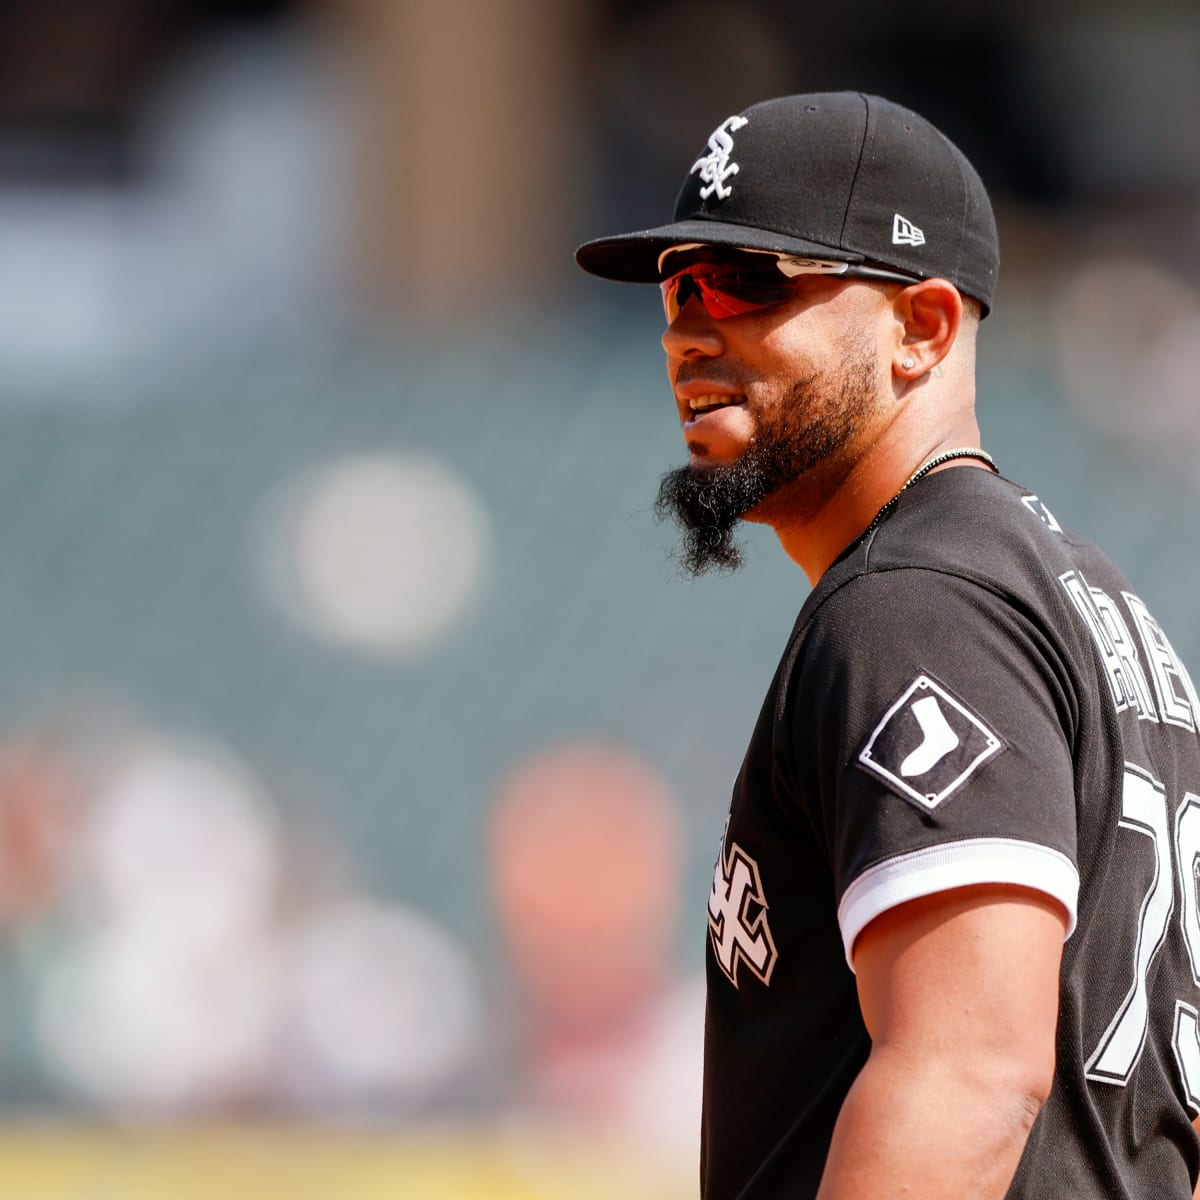 Chicago Cubs Will Have Interest in Pursuing Jose Abreu This Offseason  According to Report - Sports Illustrated Inside The Cubs